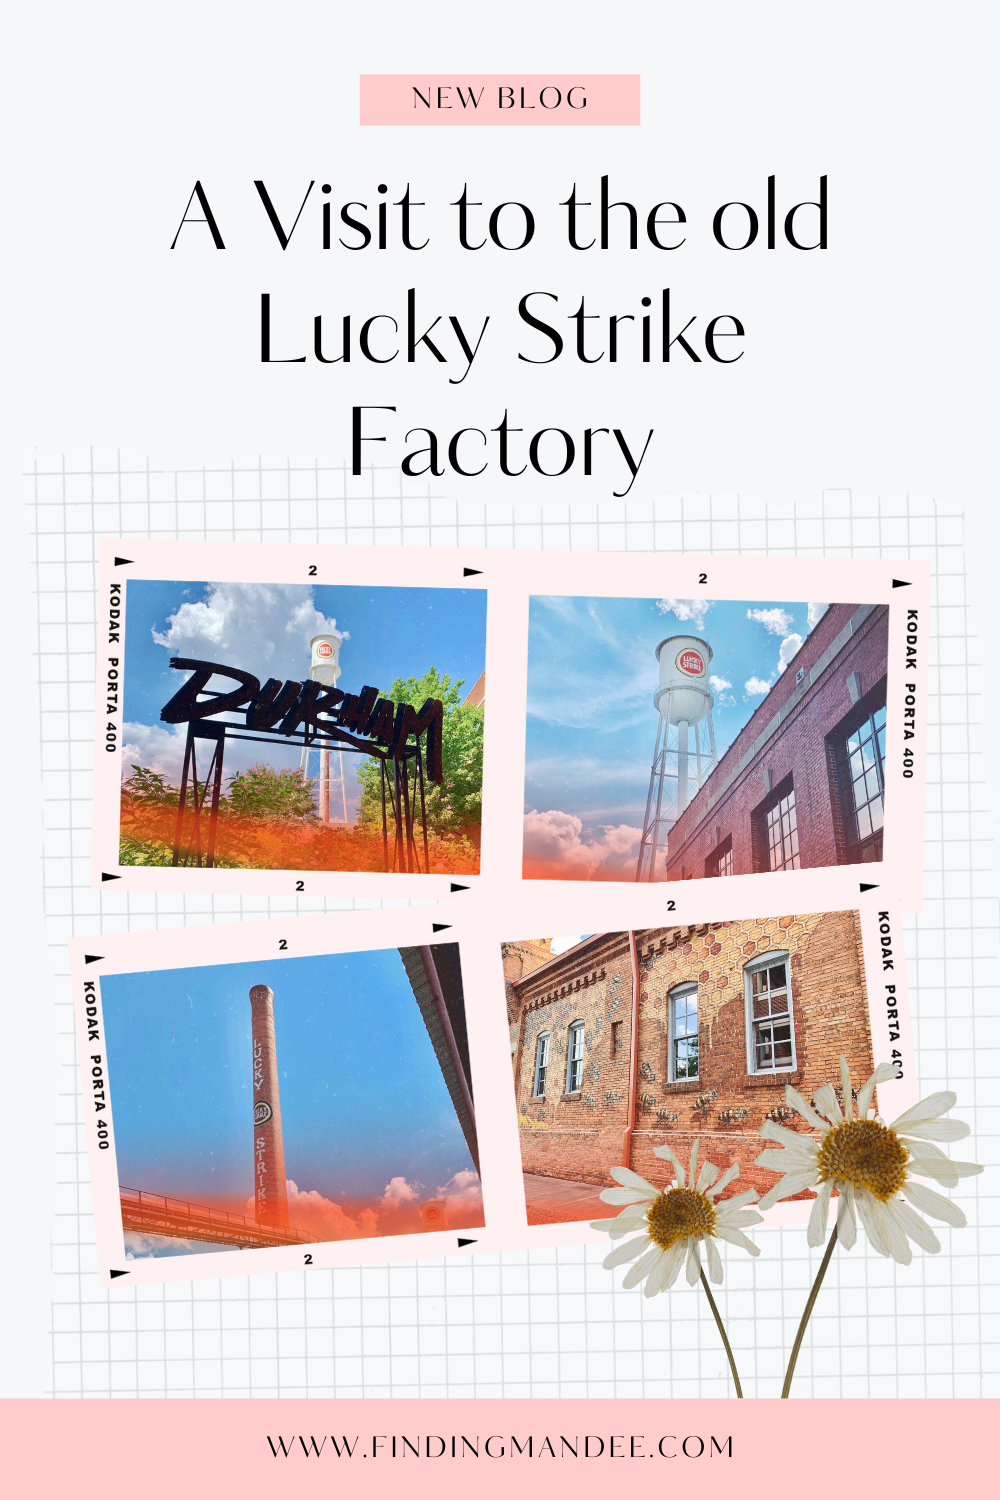 A Visit to the old Lucky Strike Factory in North Carolina: What to Expect | Finding Mandee